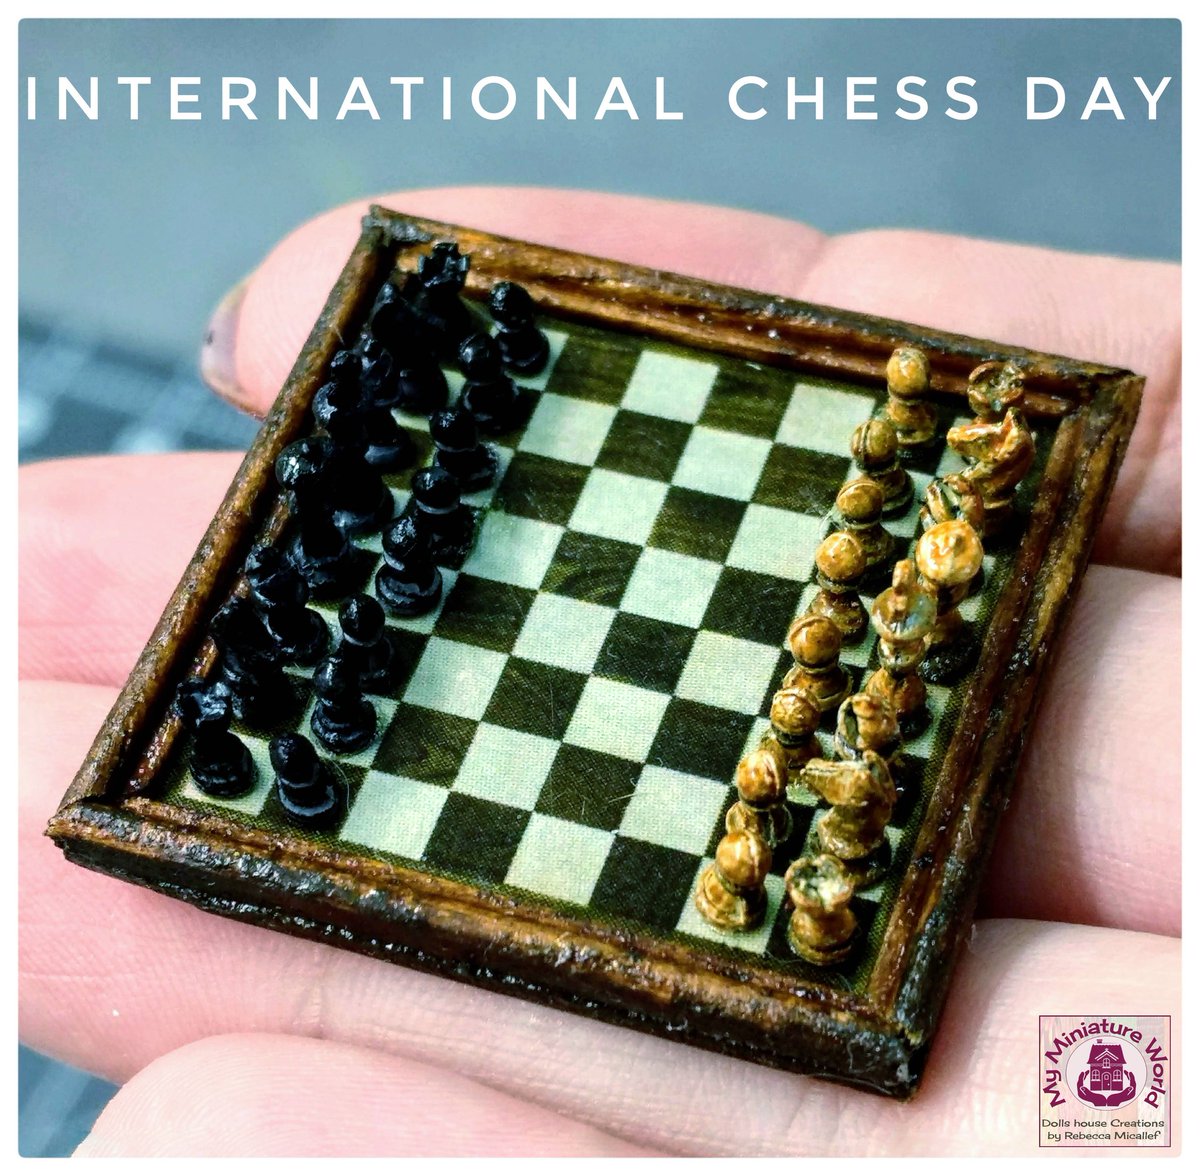 Today is International Chess Day. A miniature Chess Board game that I did. The Chess Pieces were hand painted by my father.

#dollshouse #miniatures #miniaturist #chess #chessboard #chesspieces #handpainted #nationalchessday #chessday #picoftheday #photooftheday